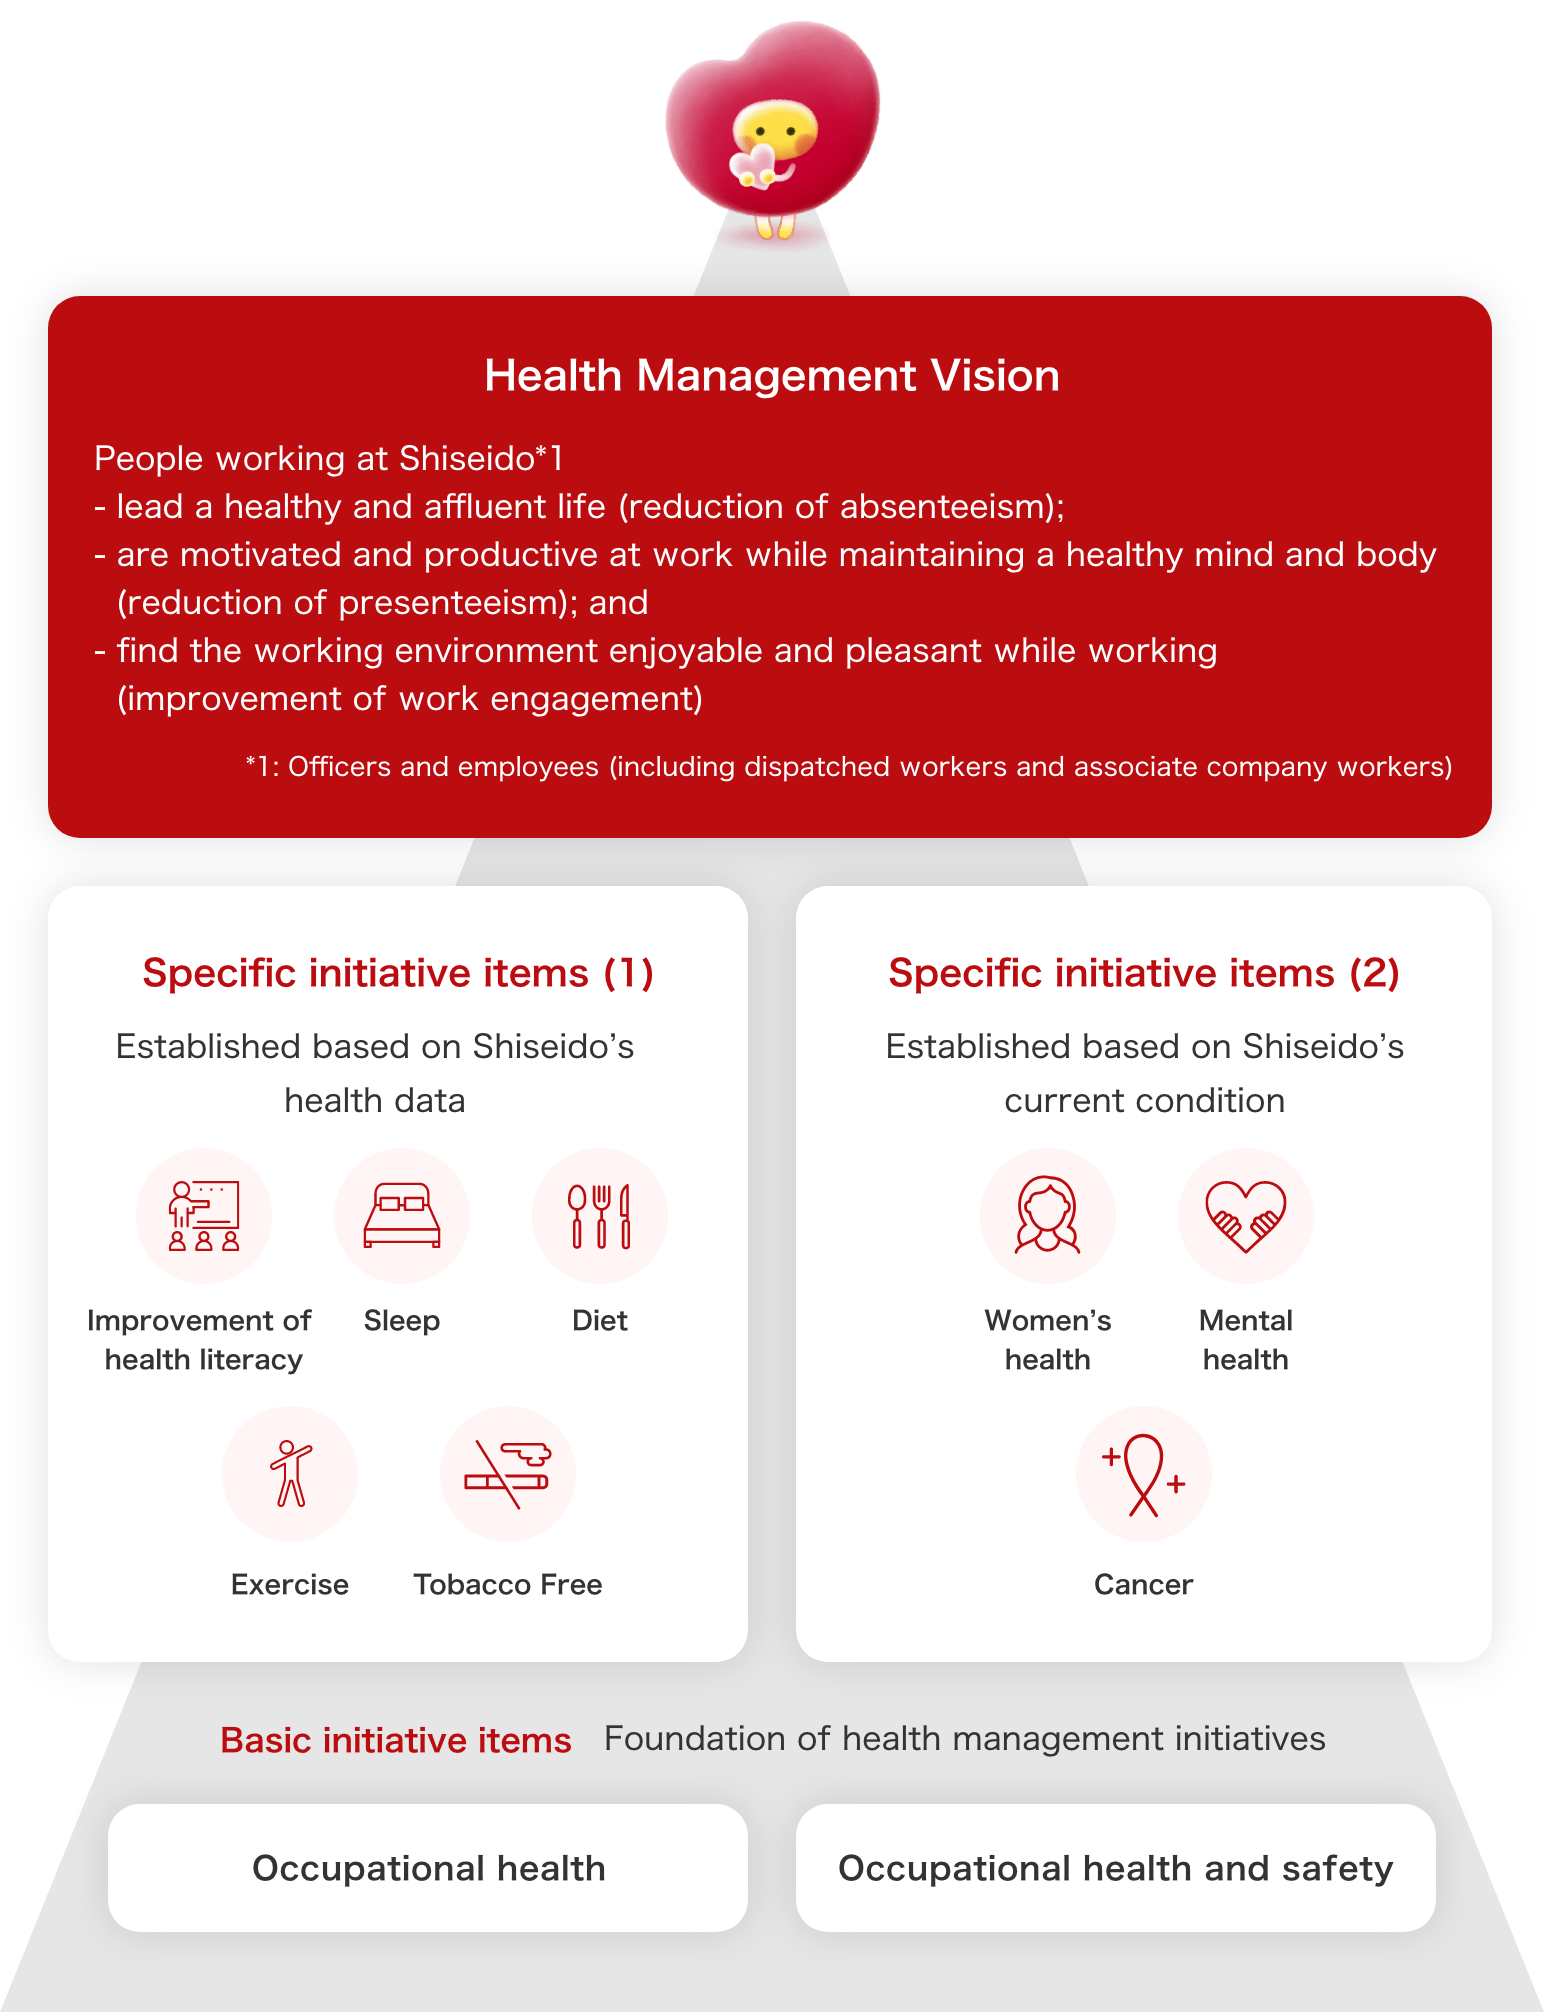 Objectives of Health Management in Shiseido